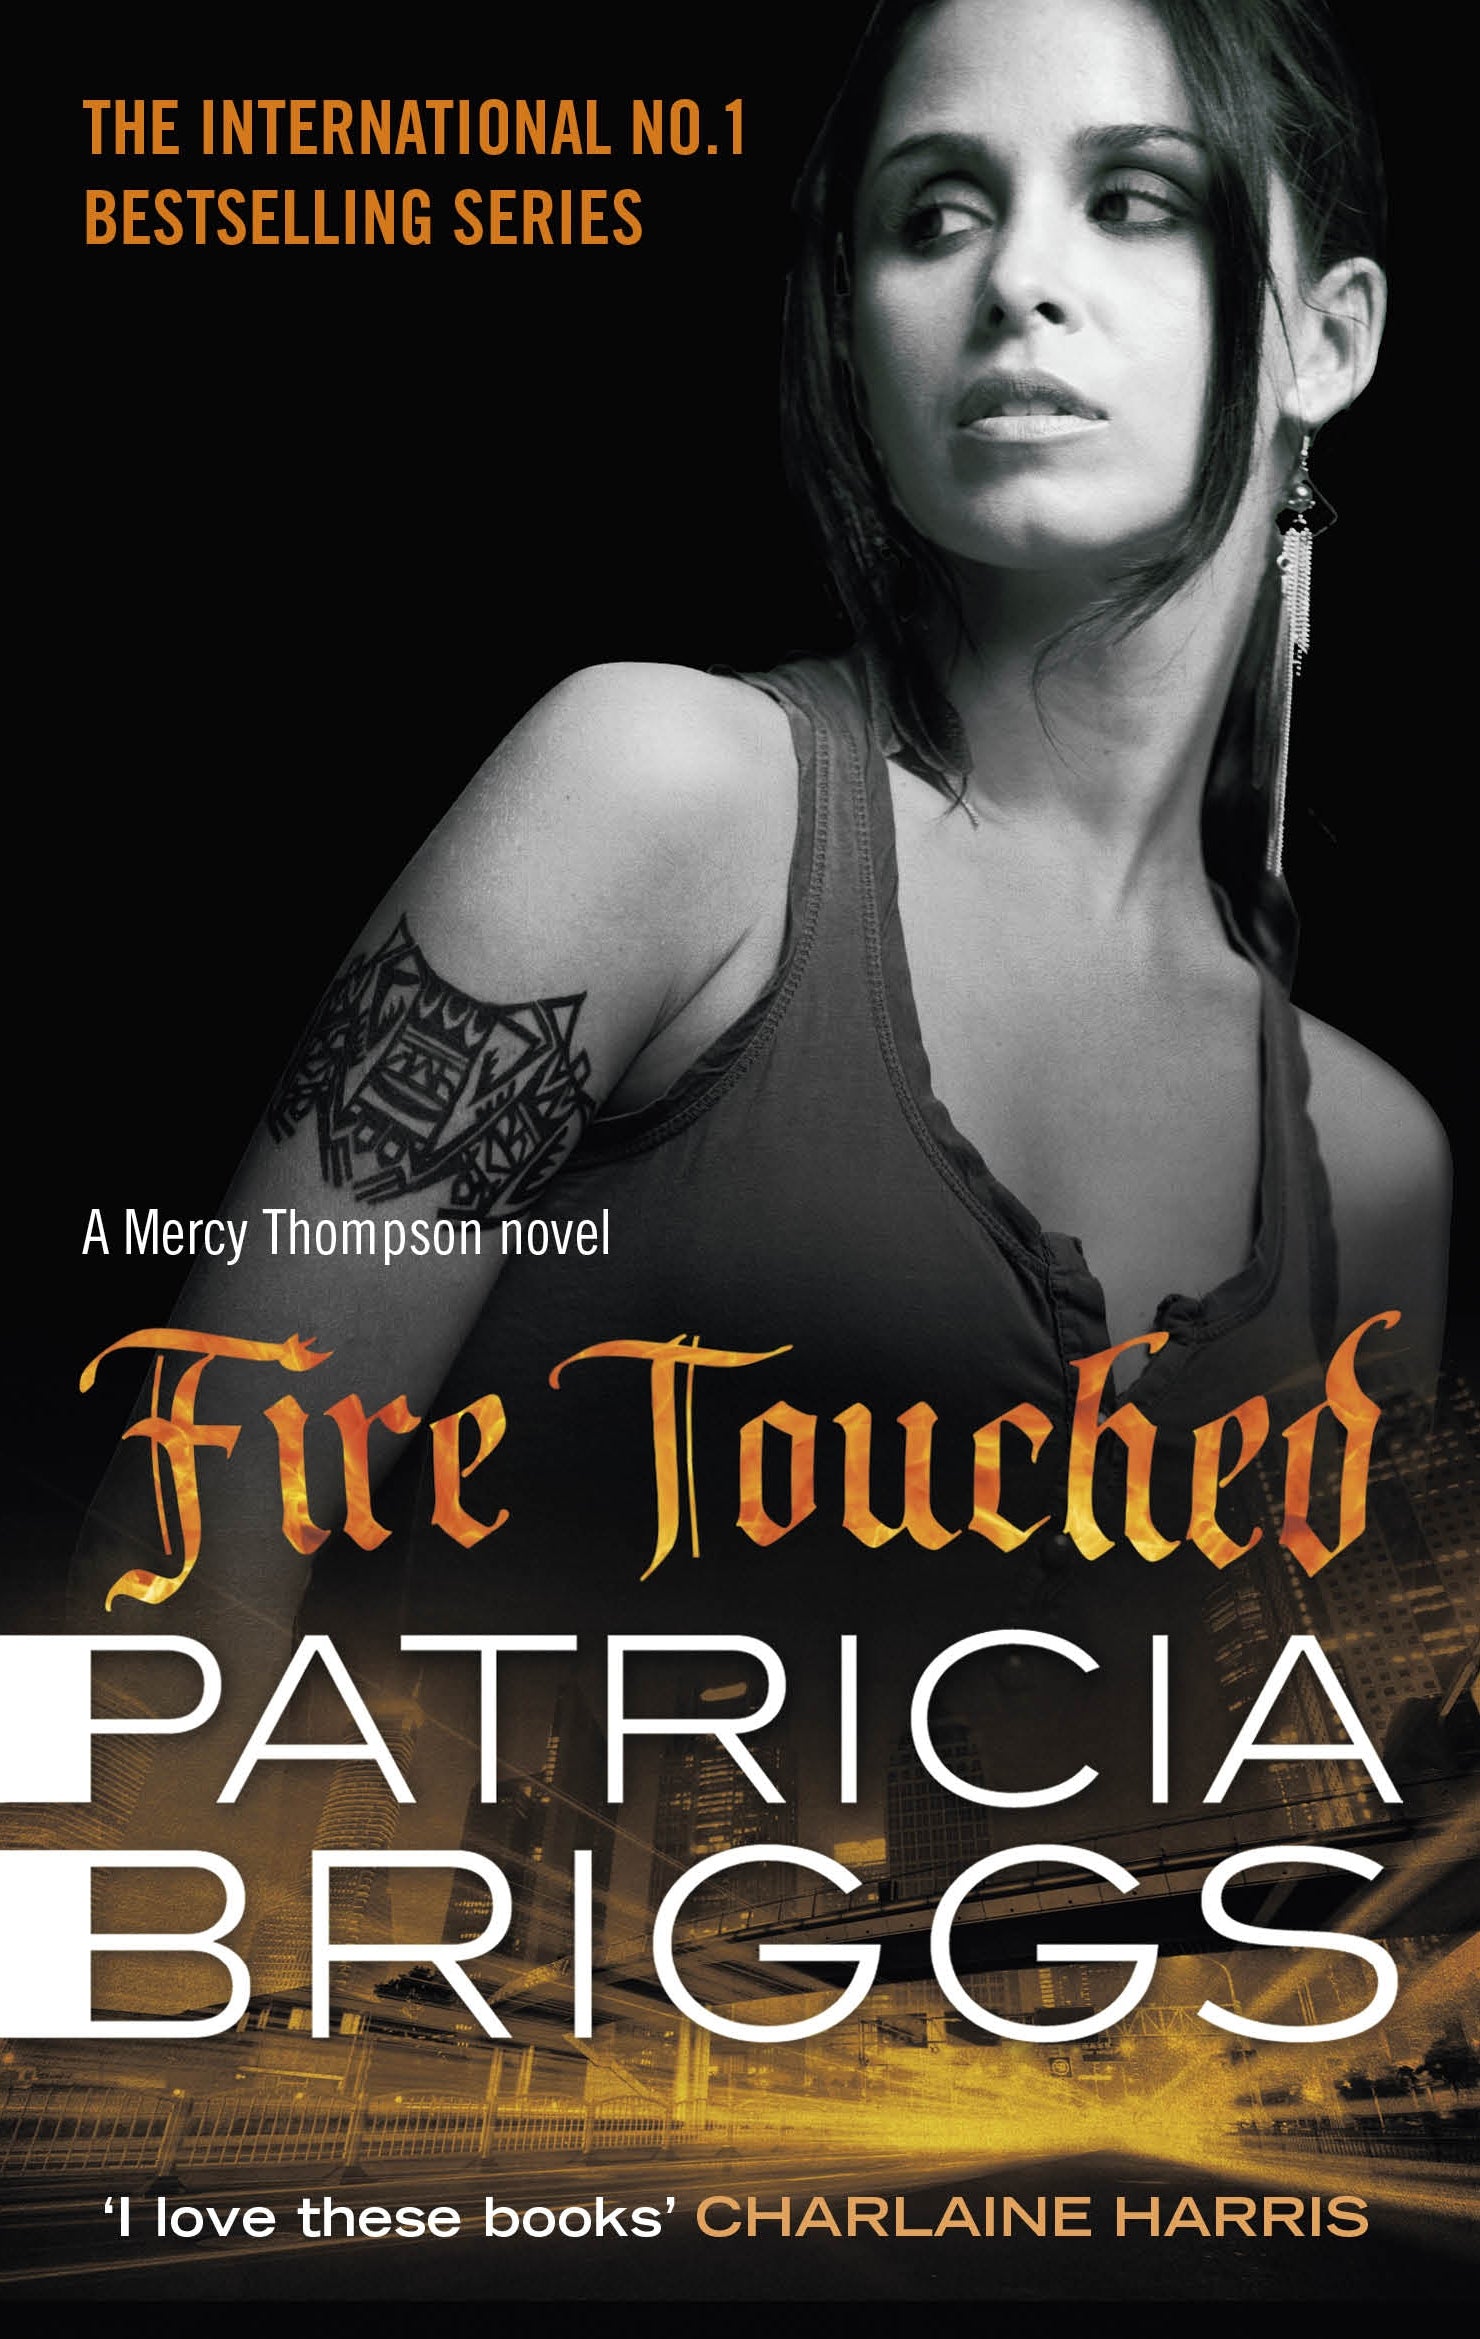 Fire Touched by Patricia Briggs